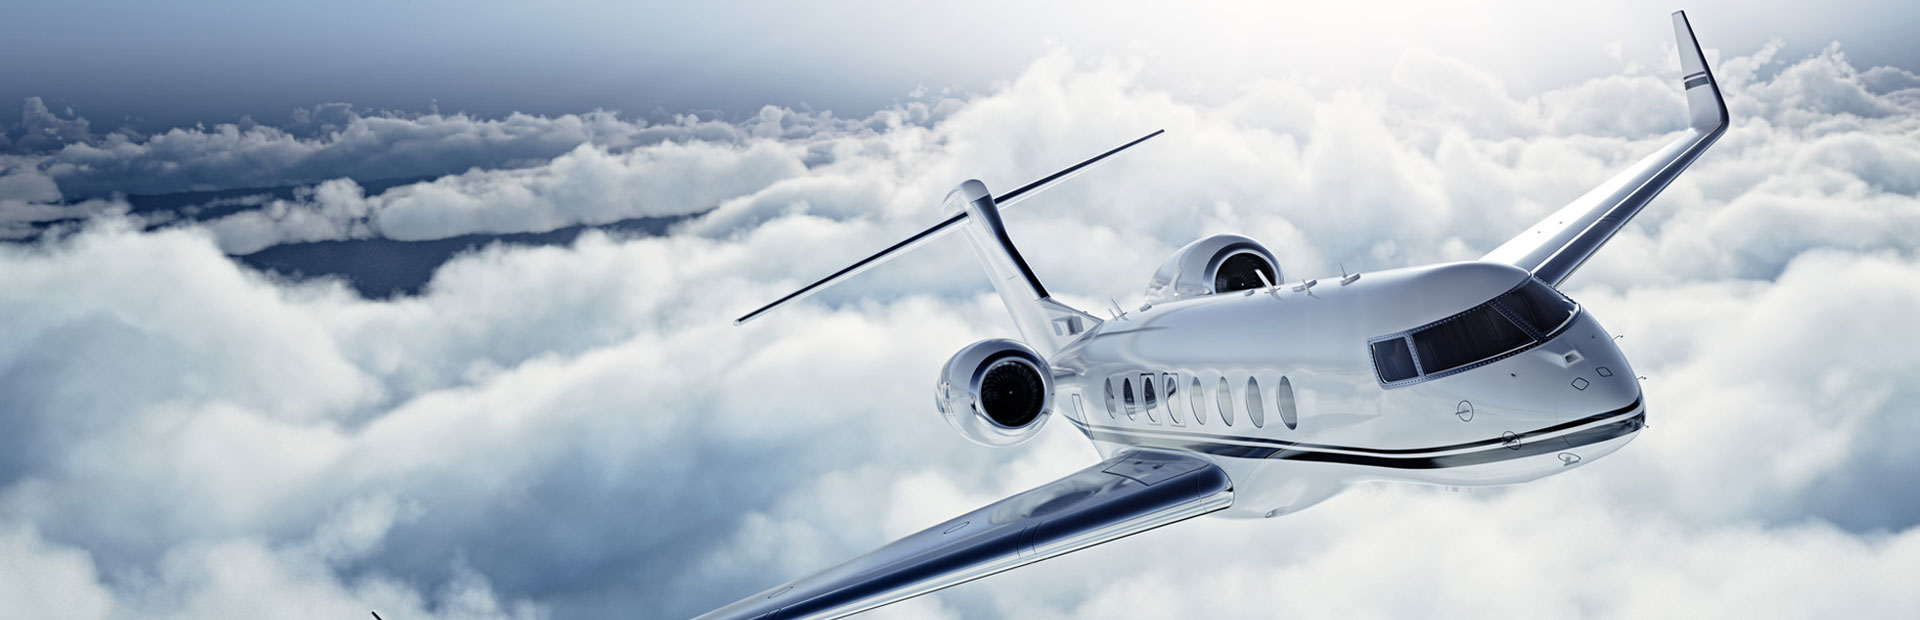 Southwest Business Aviation Consulting, LLC